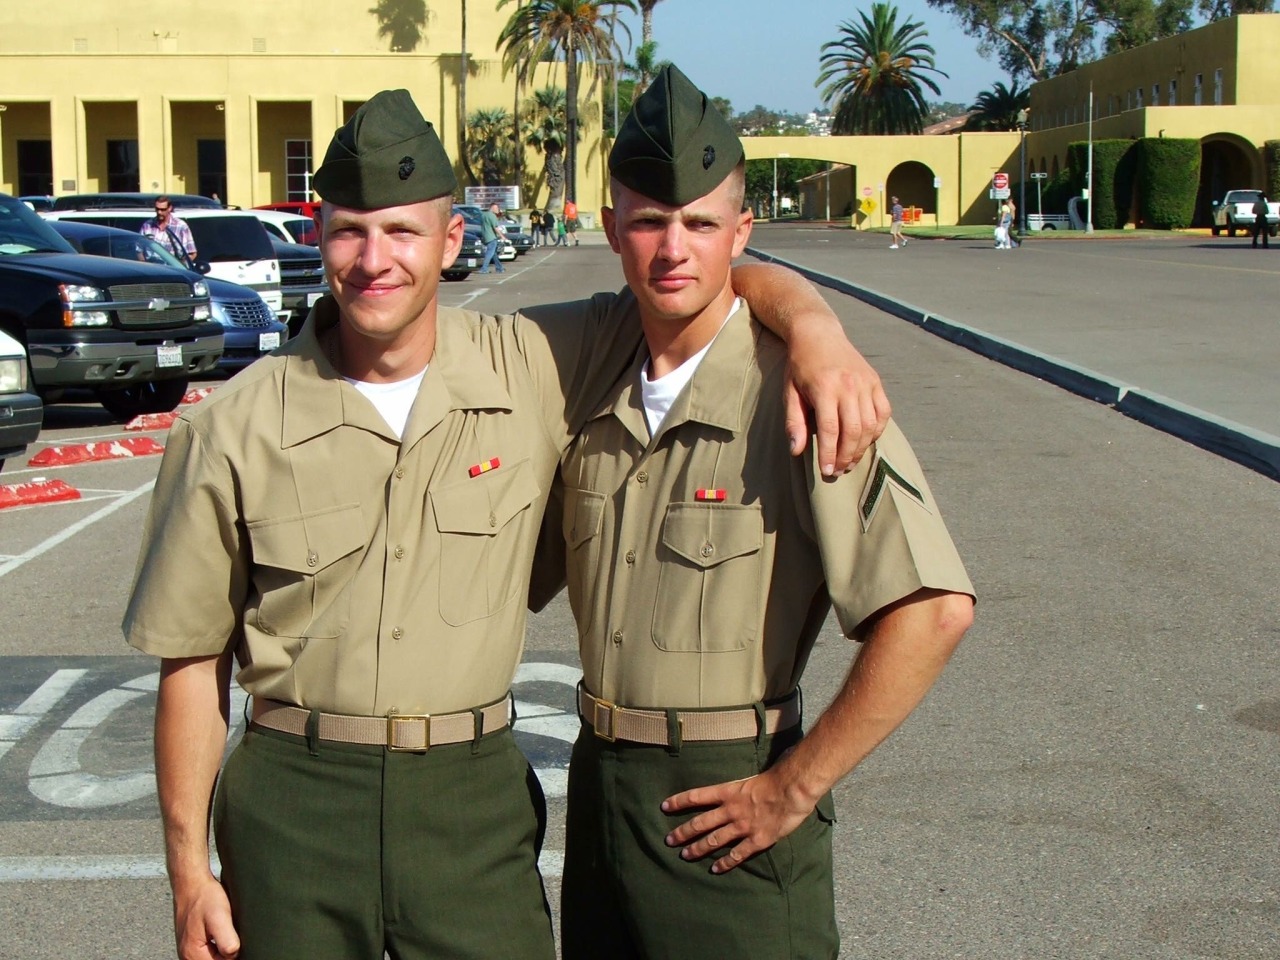 Happy 246th Birthday Marines! Here’s your adult photos